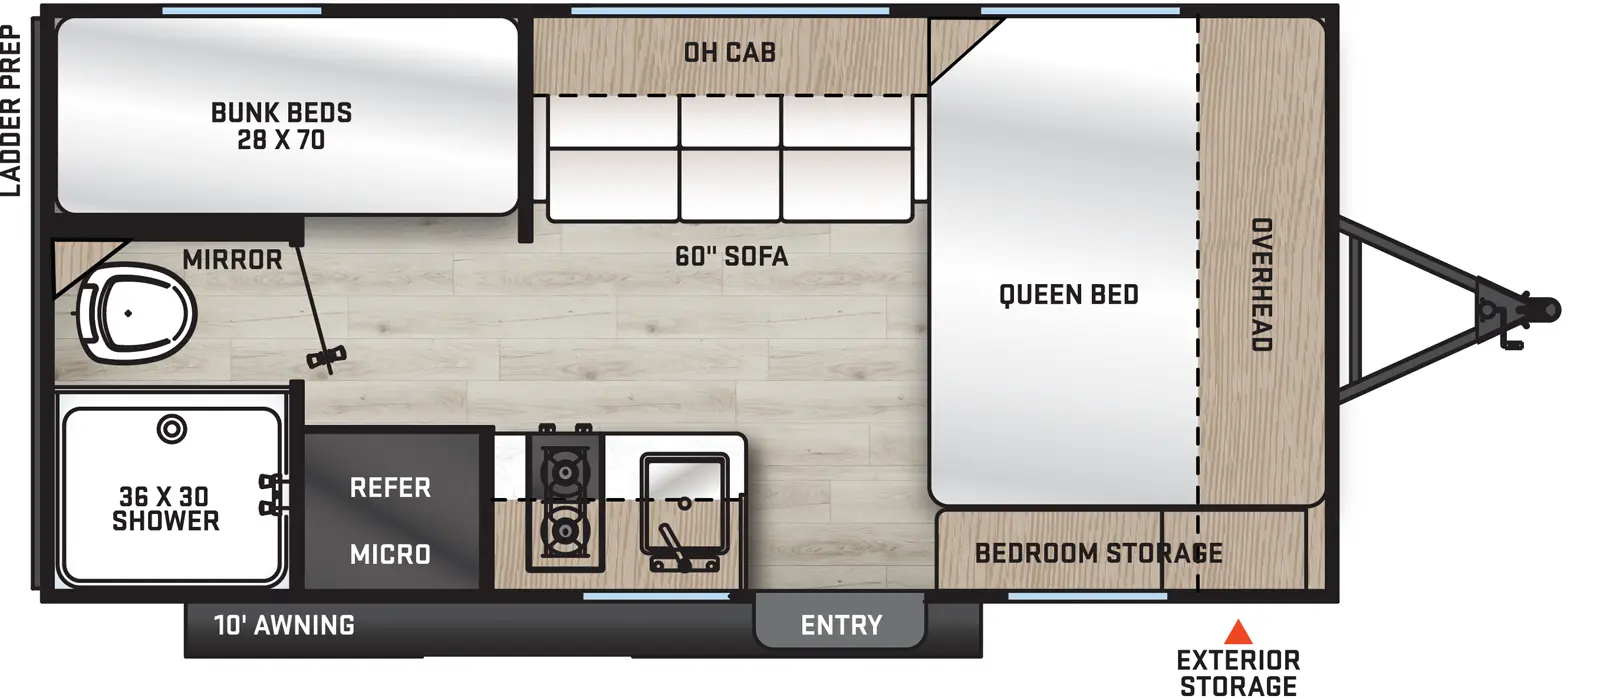 The 164BHX has no slide outs with one entry door on the door side, front storage, and 10 foot awning. Interior layout from front to back: side facing queen bed with cabinets overhead and door side bedroom storage, kitchen living dining area with 60 inch sofa and overhead cabinet on the off-door side, on the door side sink, stove and refrigerator with microwave and cabinets overhead. Bathroom located on the rear door side with shower and toilet only, bunk beds located on the rear off-door side. 